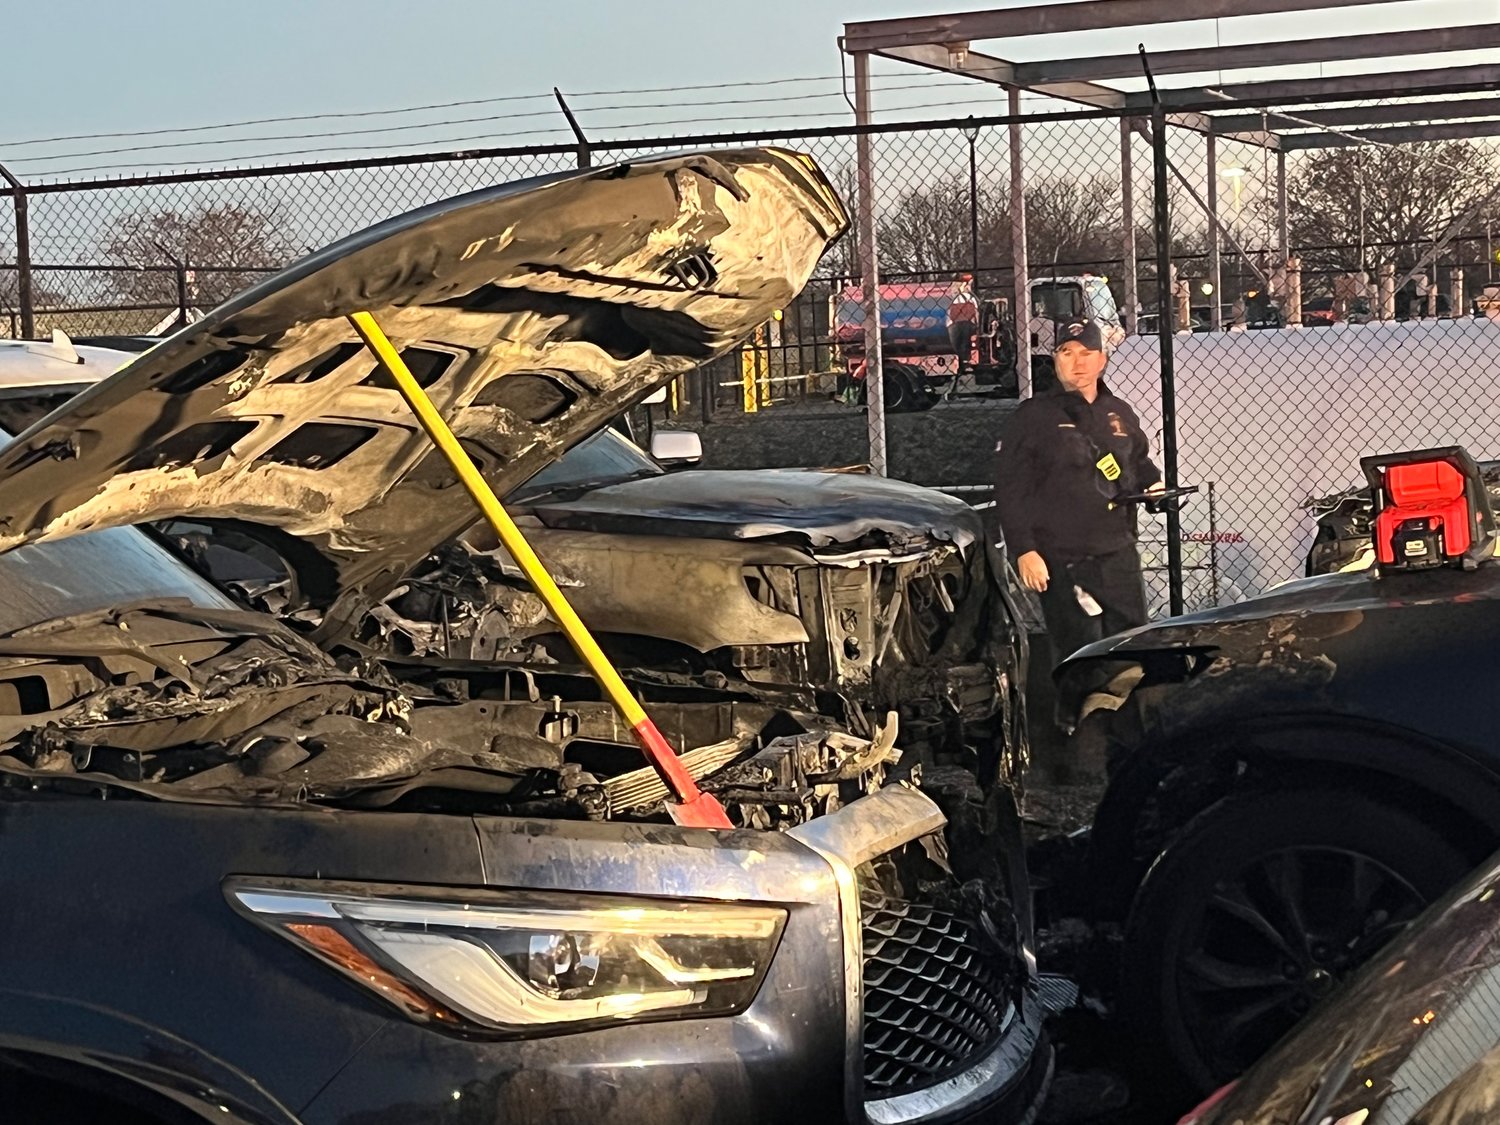 Several vehicles were damaged by the fire.